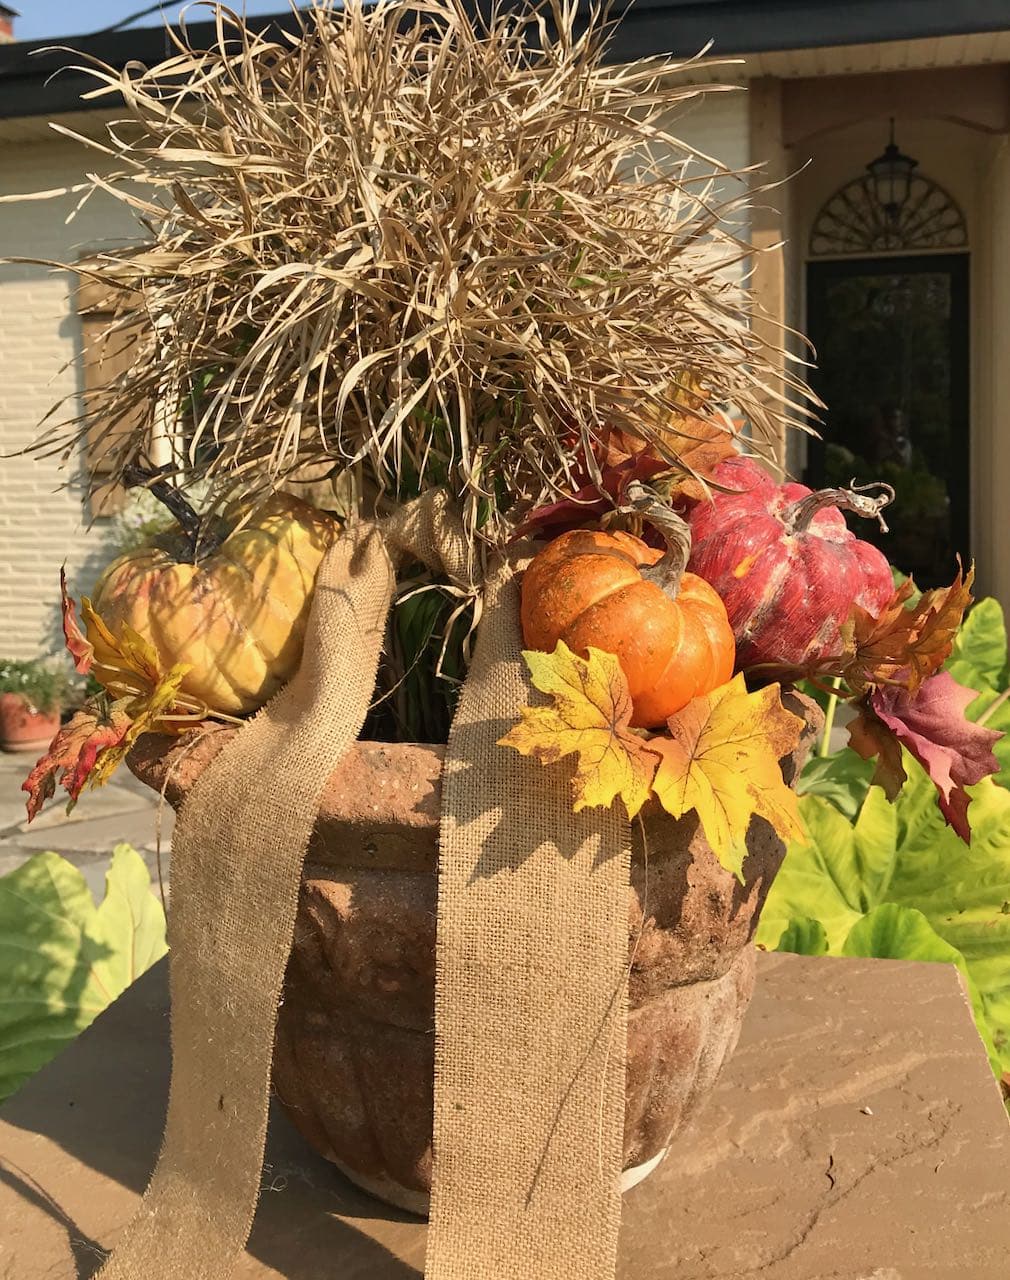 Decorative terra cotta pot with tall tuft of dried grass surrounded by three different colored pumpkins and fall leaves